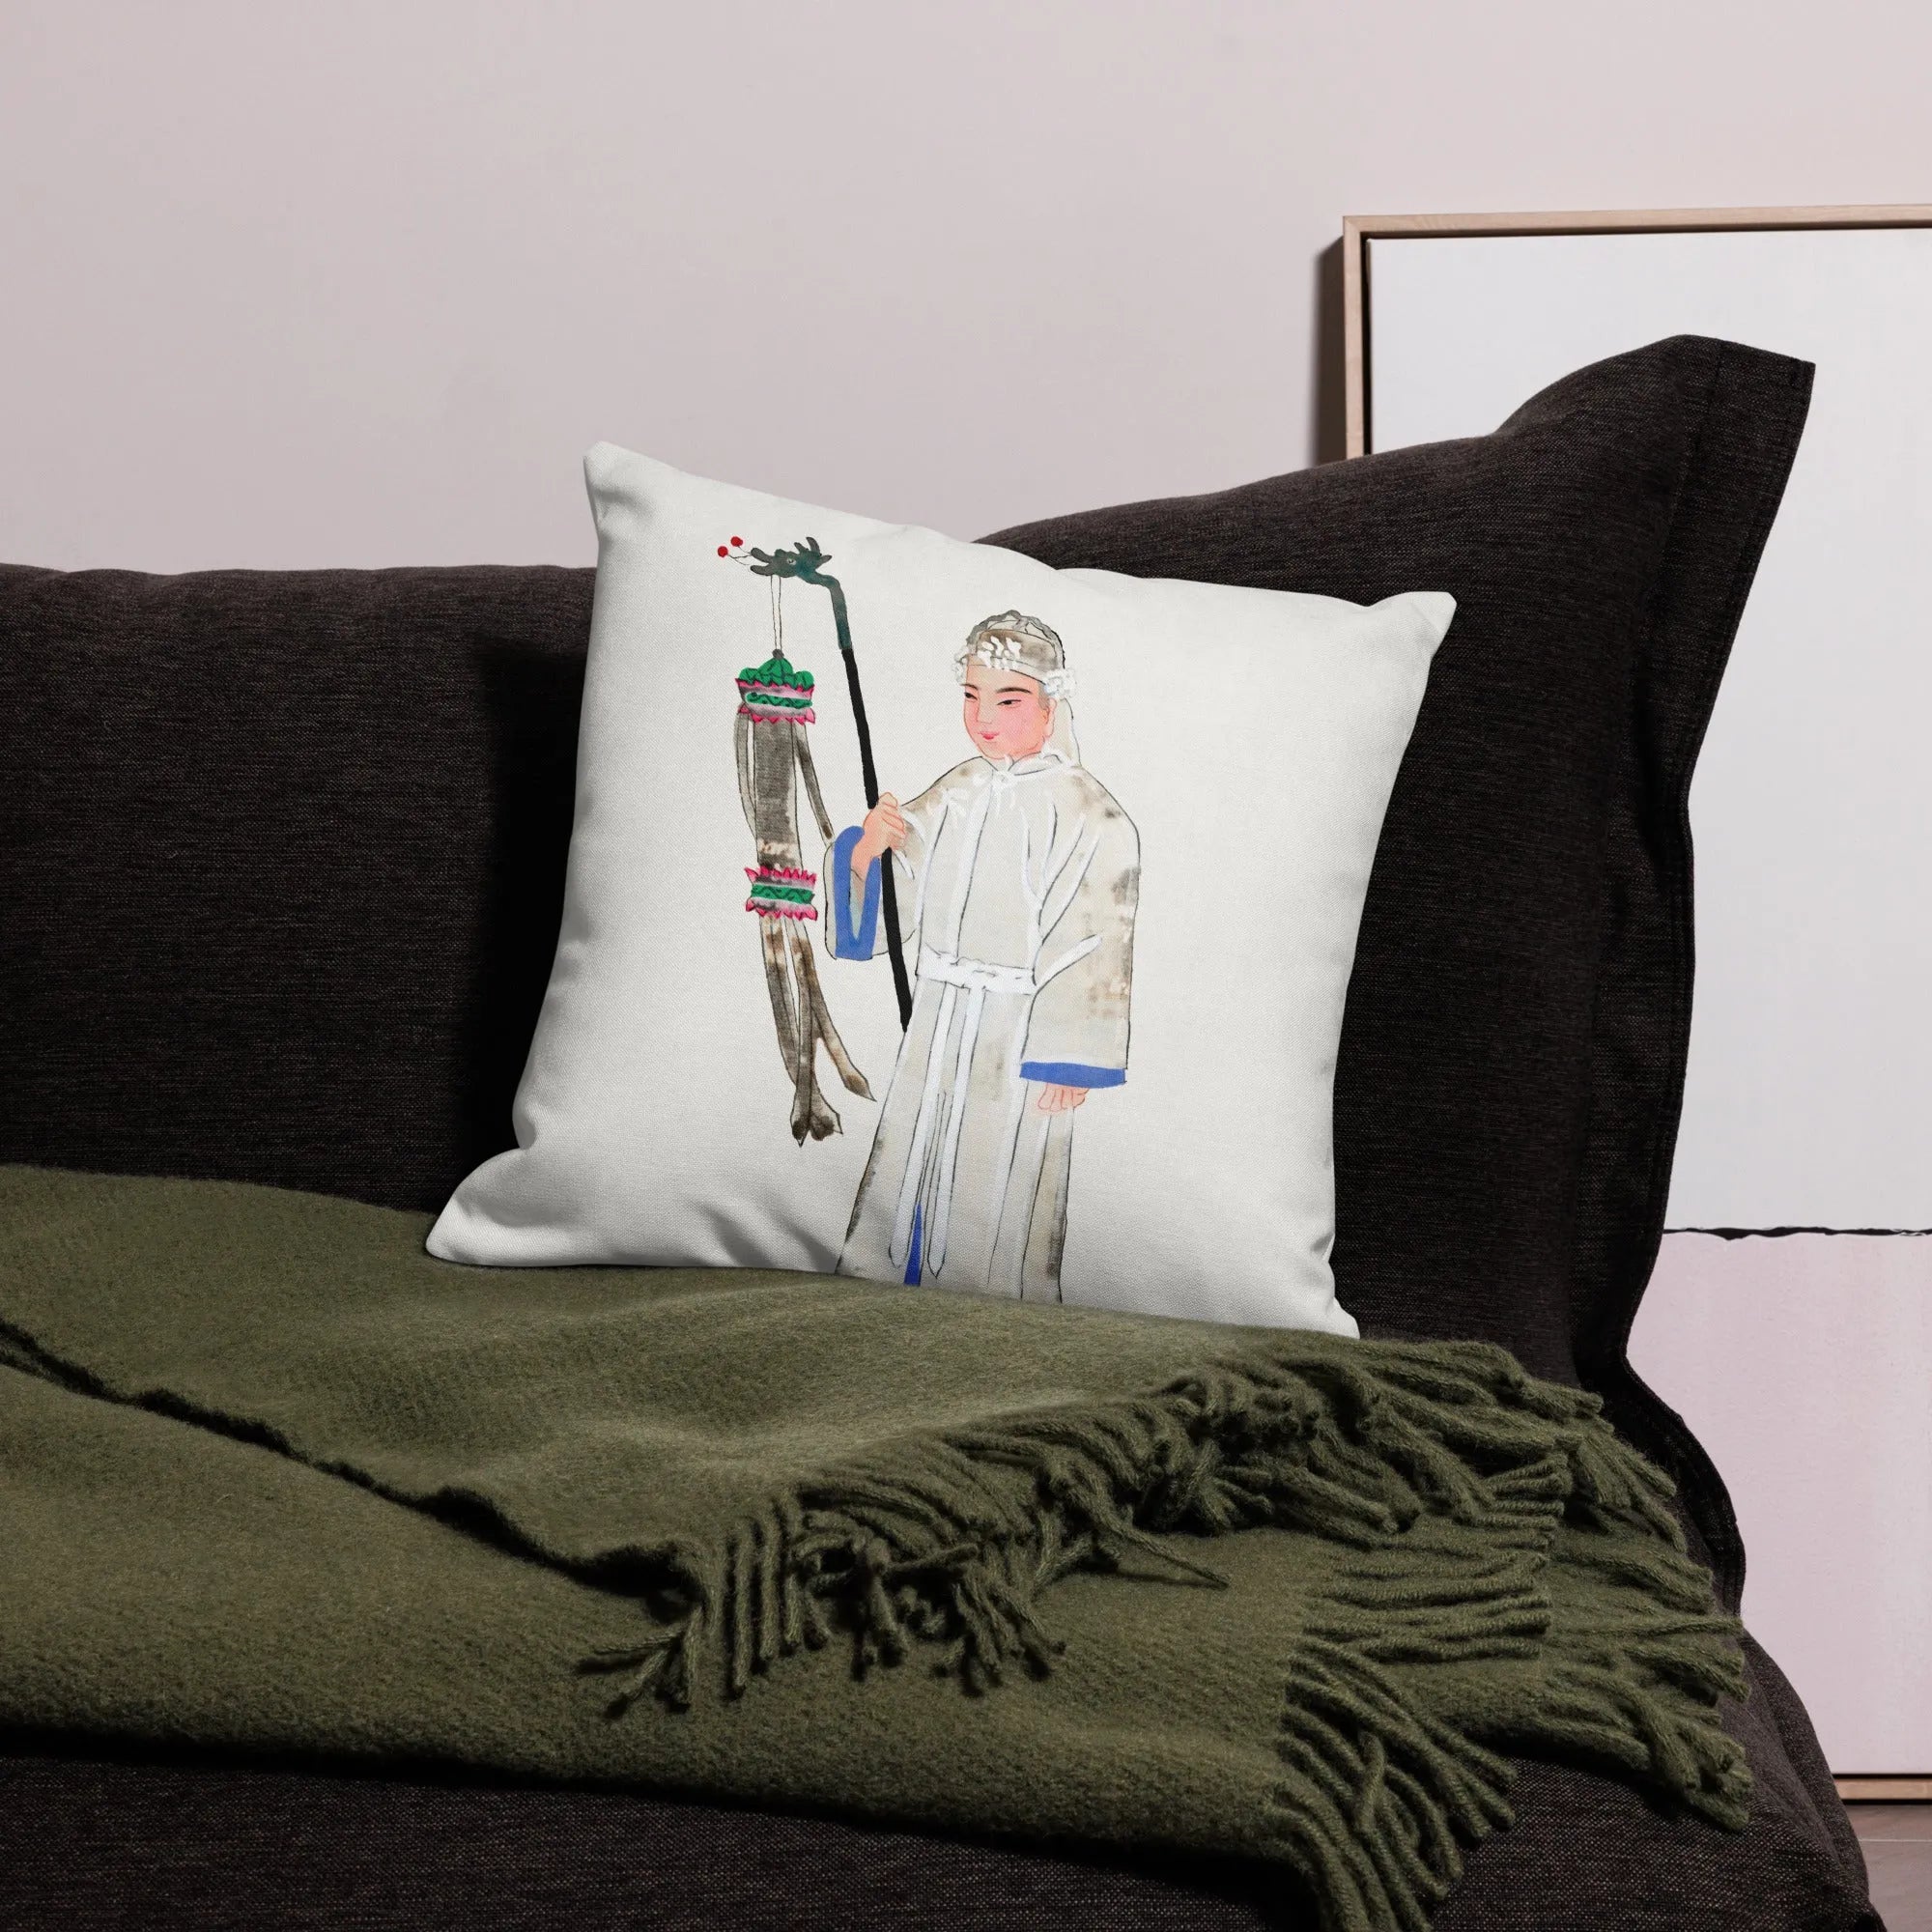 Chinese Man In Mourning Cushion - Throw Pillows - Aesthetic Art